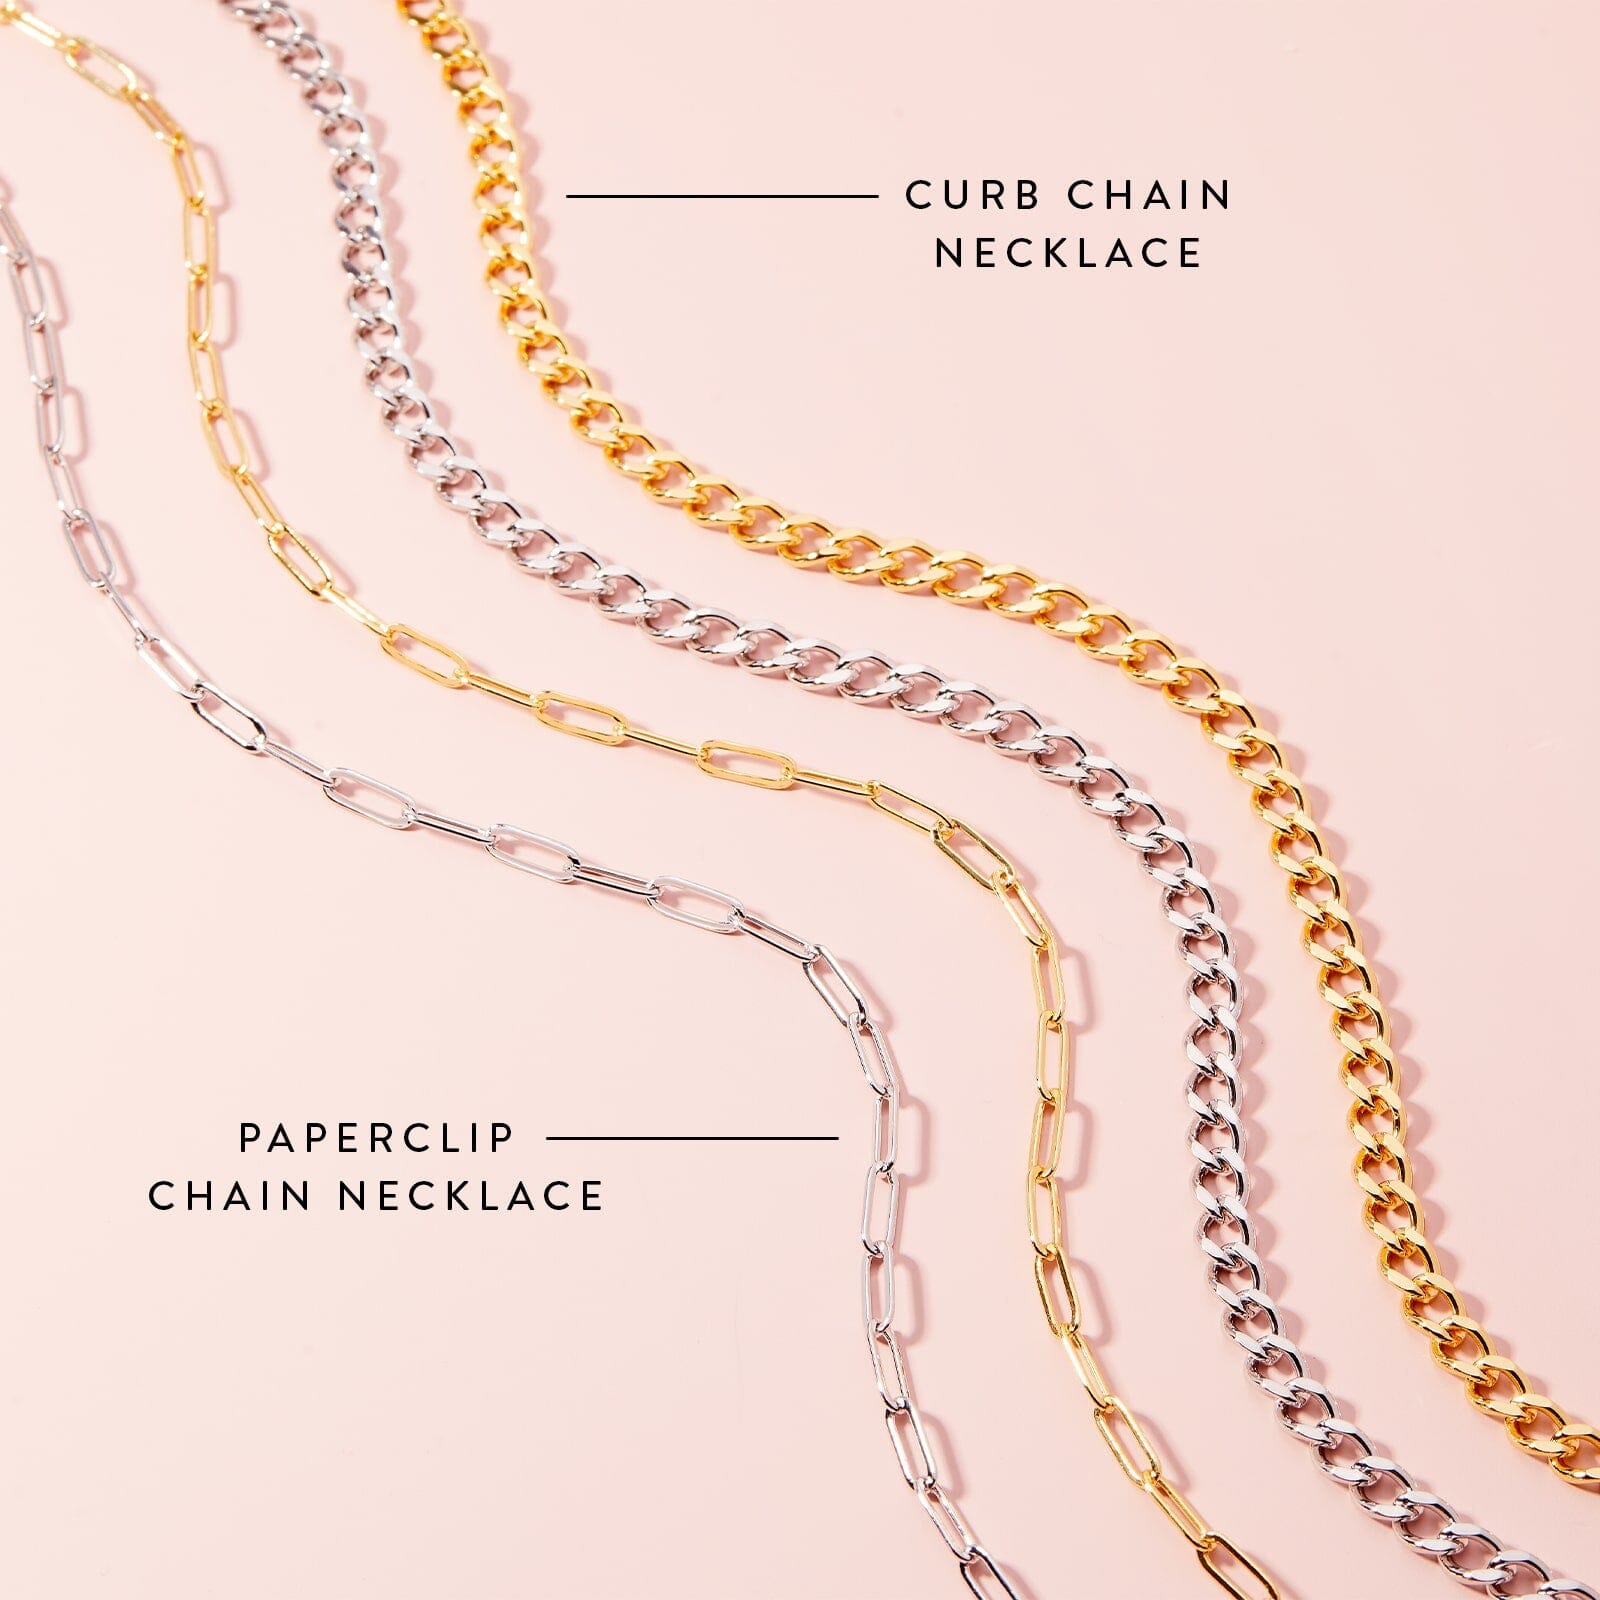 Stylin' with Paperclip Chain Necklaces | Stella & Haas